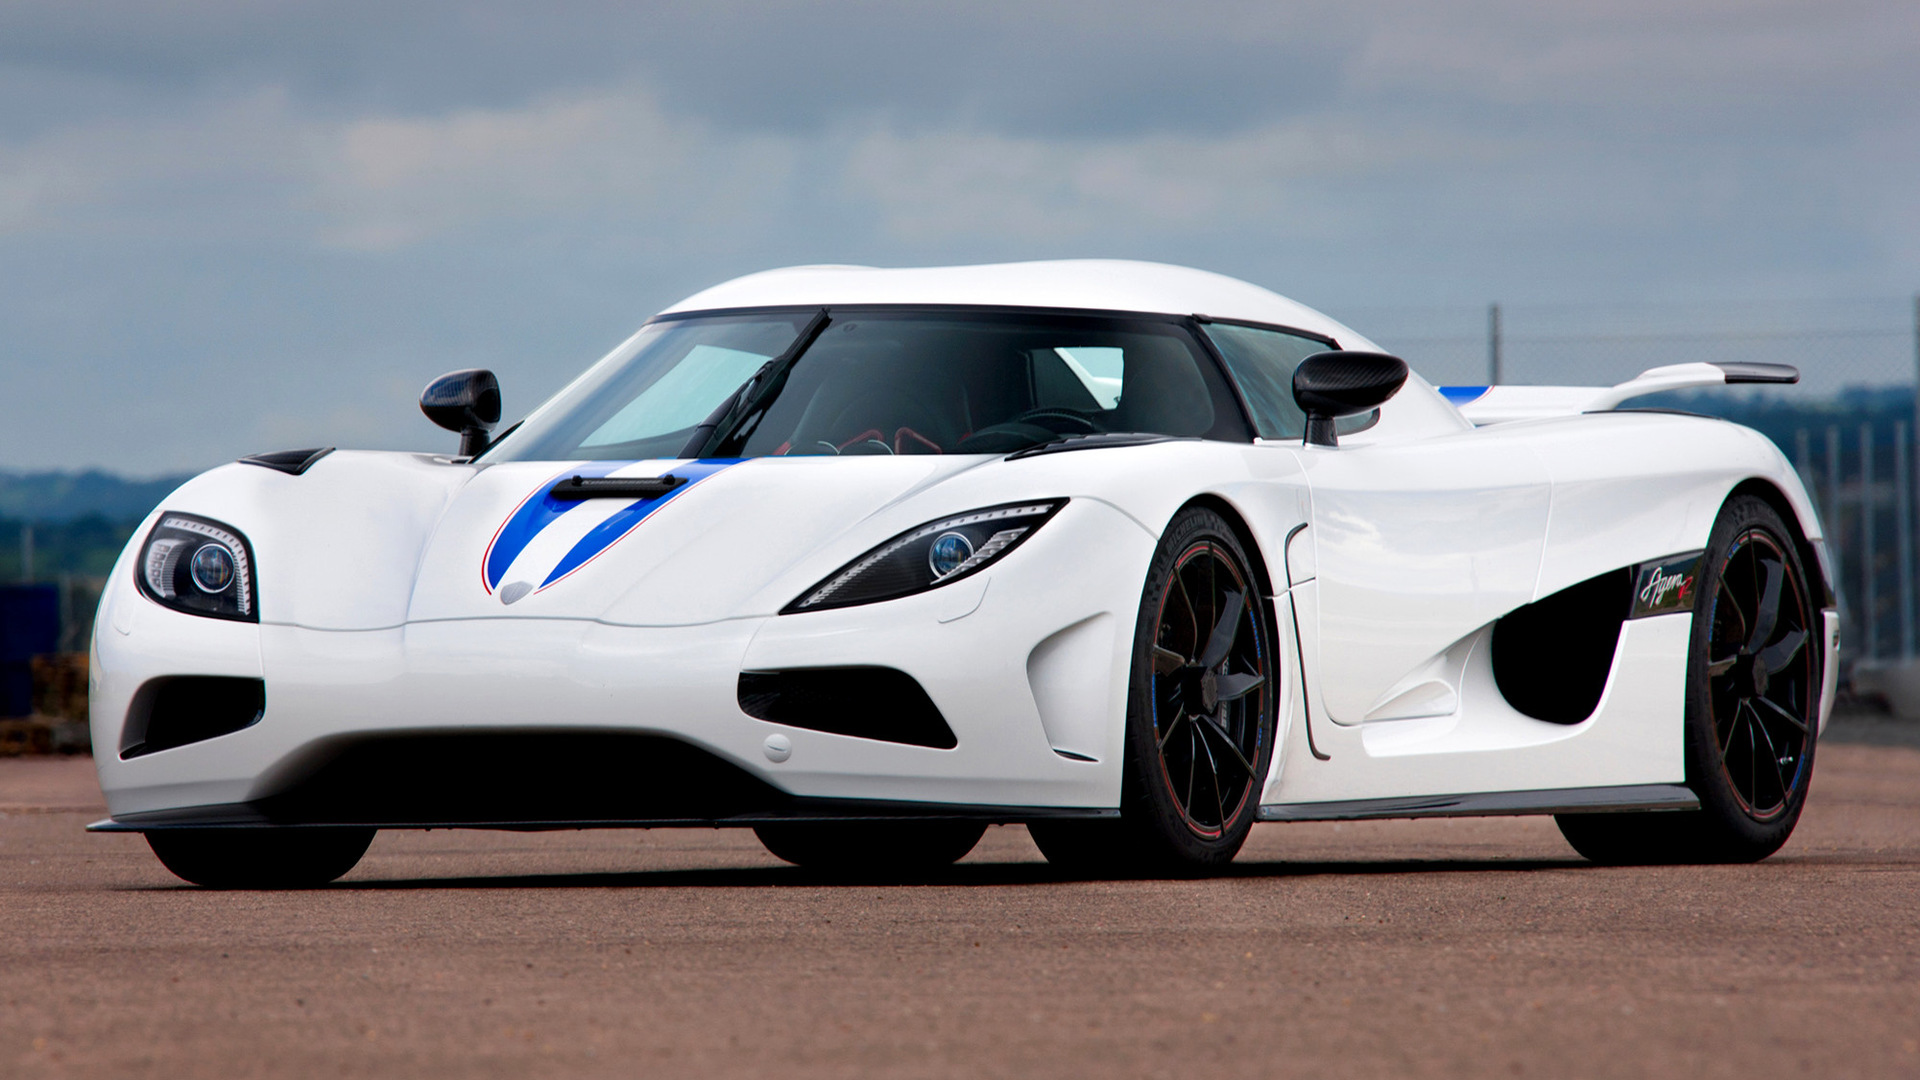 13 Dodge Carger Koenigsegg engineering wallpaper there are plenty of  from 2002-2021 